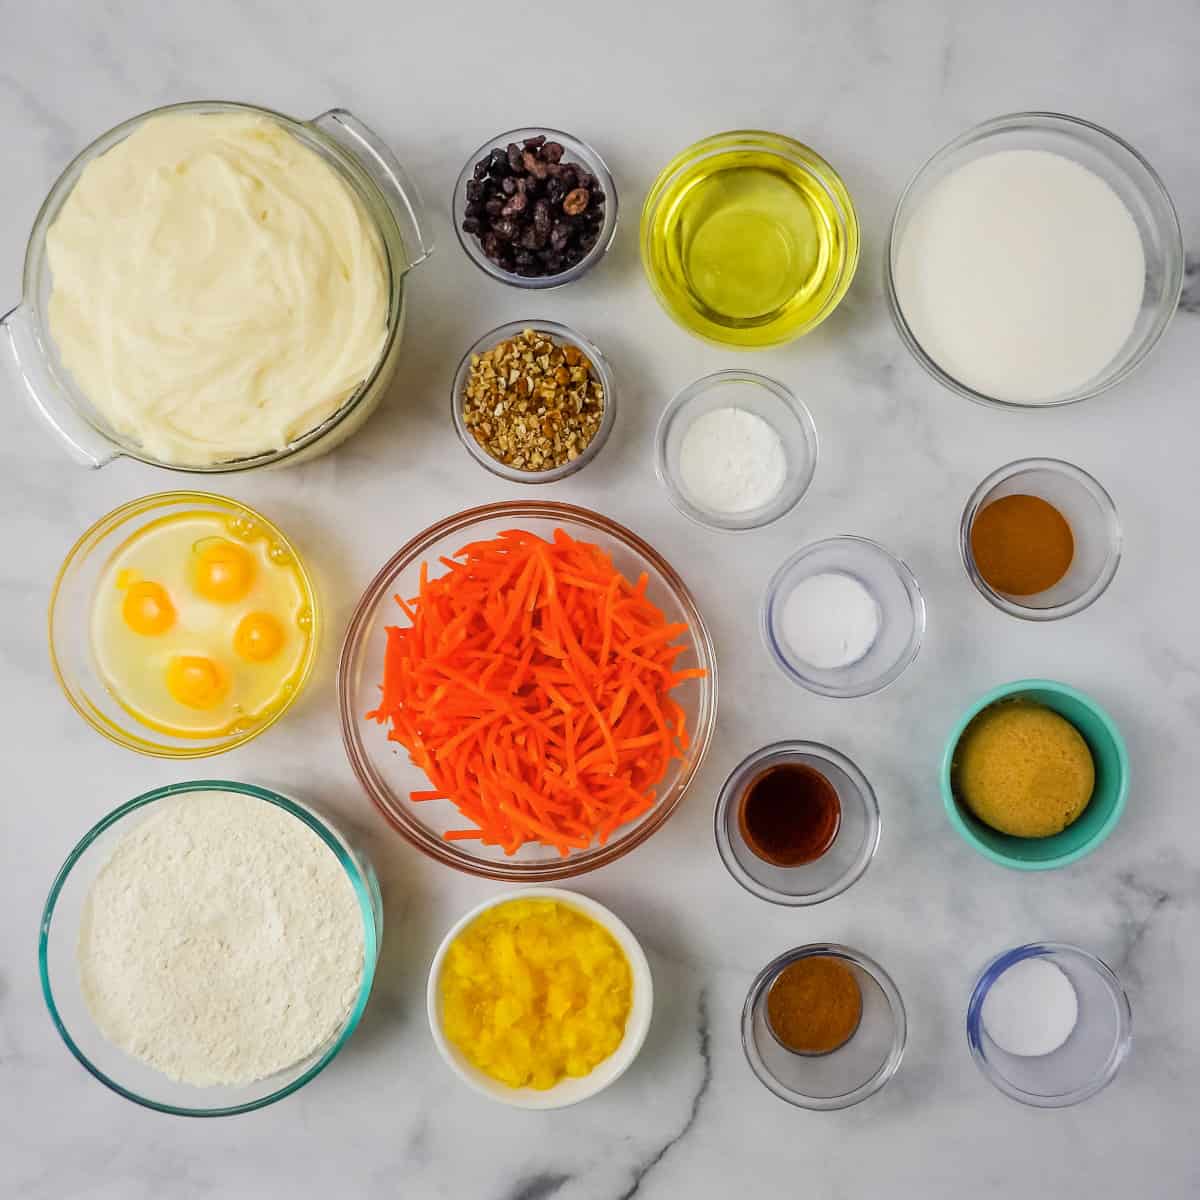 All the simple ingredients used to make homemade carrot cake on a marble counter top.